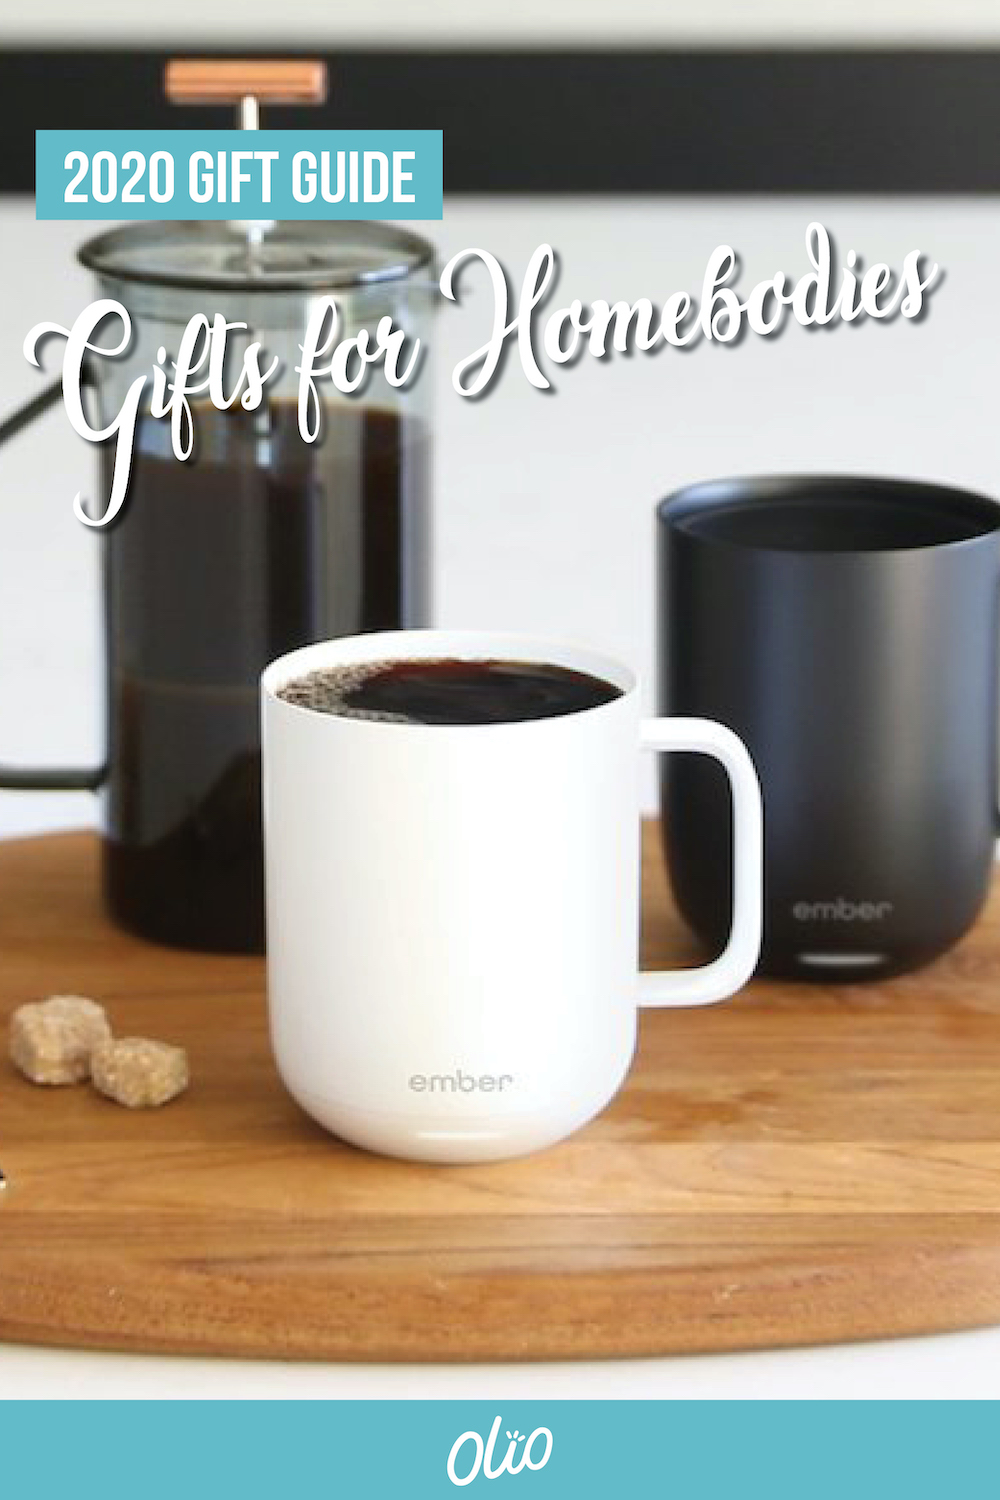 Not going anywhere this year? These ideas for the perfect gifts for staying at home! Choose from these incredible gift ideas that will help your favorite homebody stay comfy, cozy and occupied this holiday season. #giftguide #holidaygiftguide